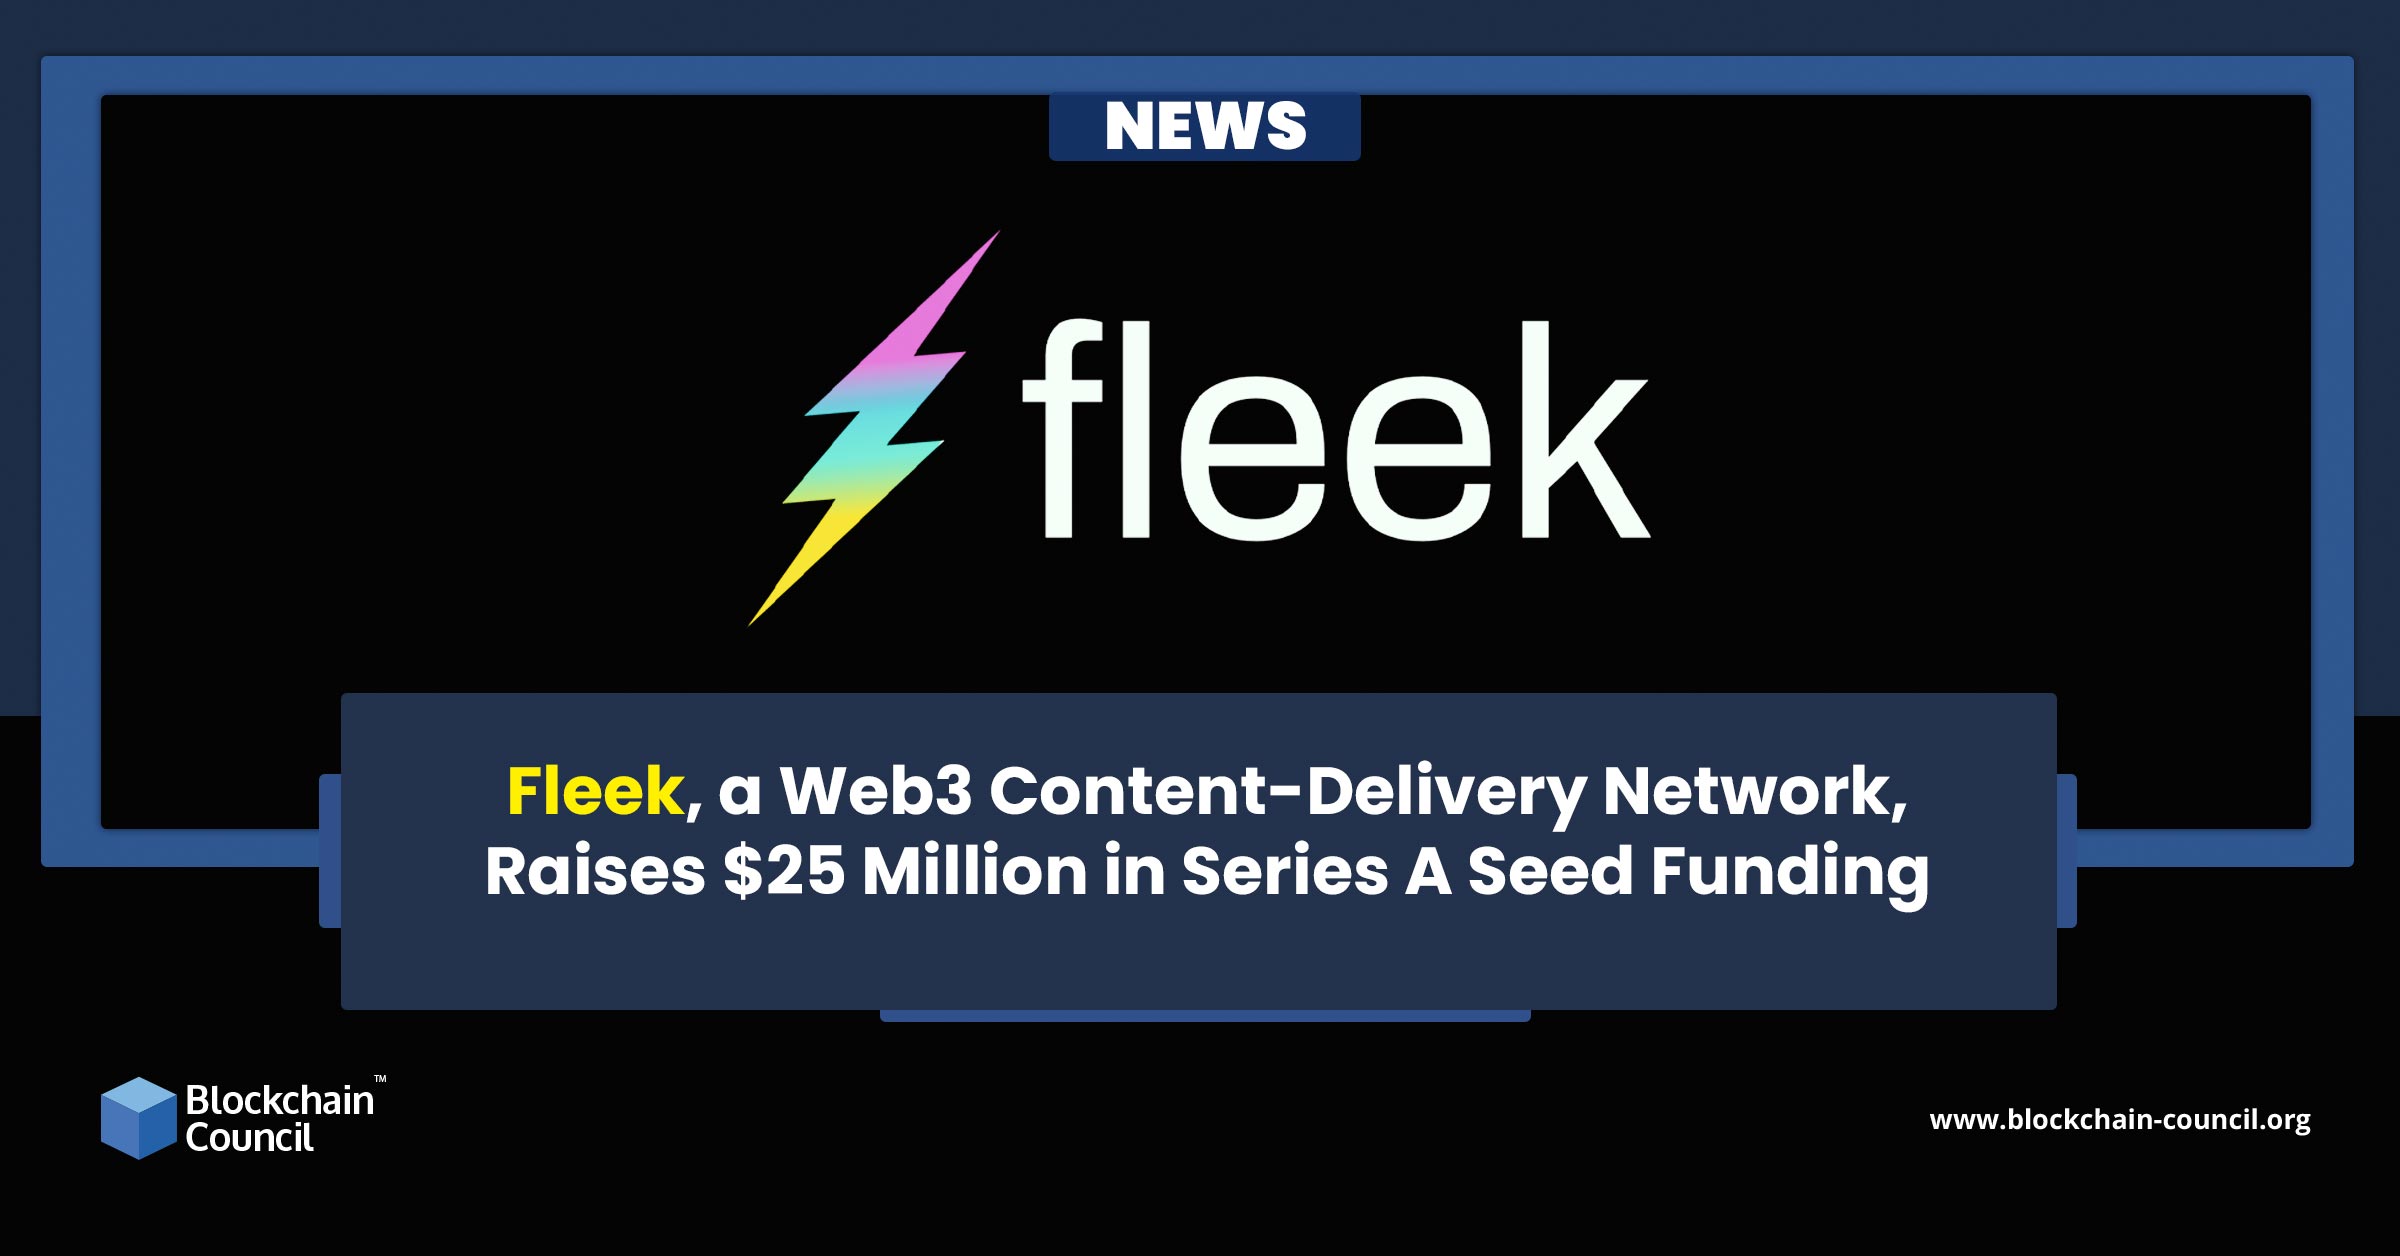 Fleek, a Web3 Content-Delivery Network, Raises $25 Million in Series A Seed Funding